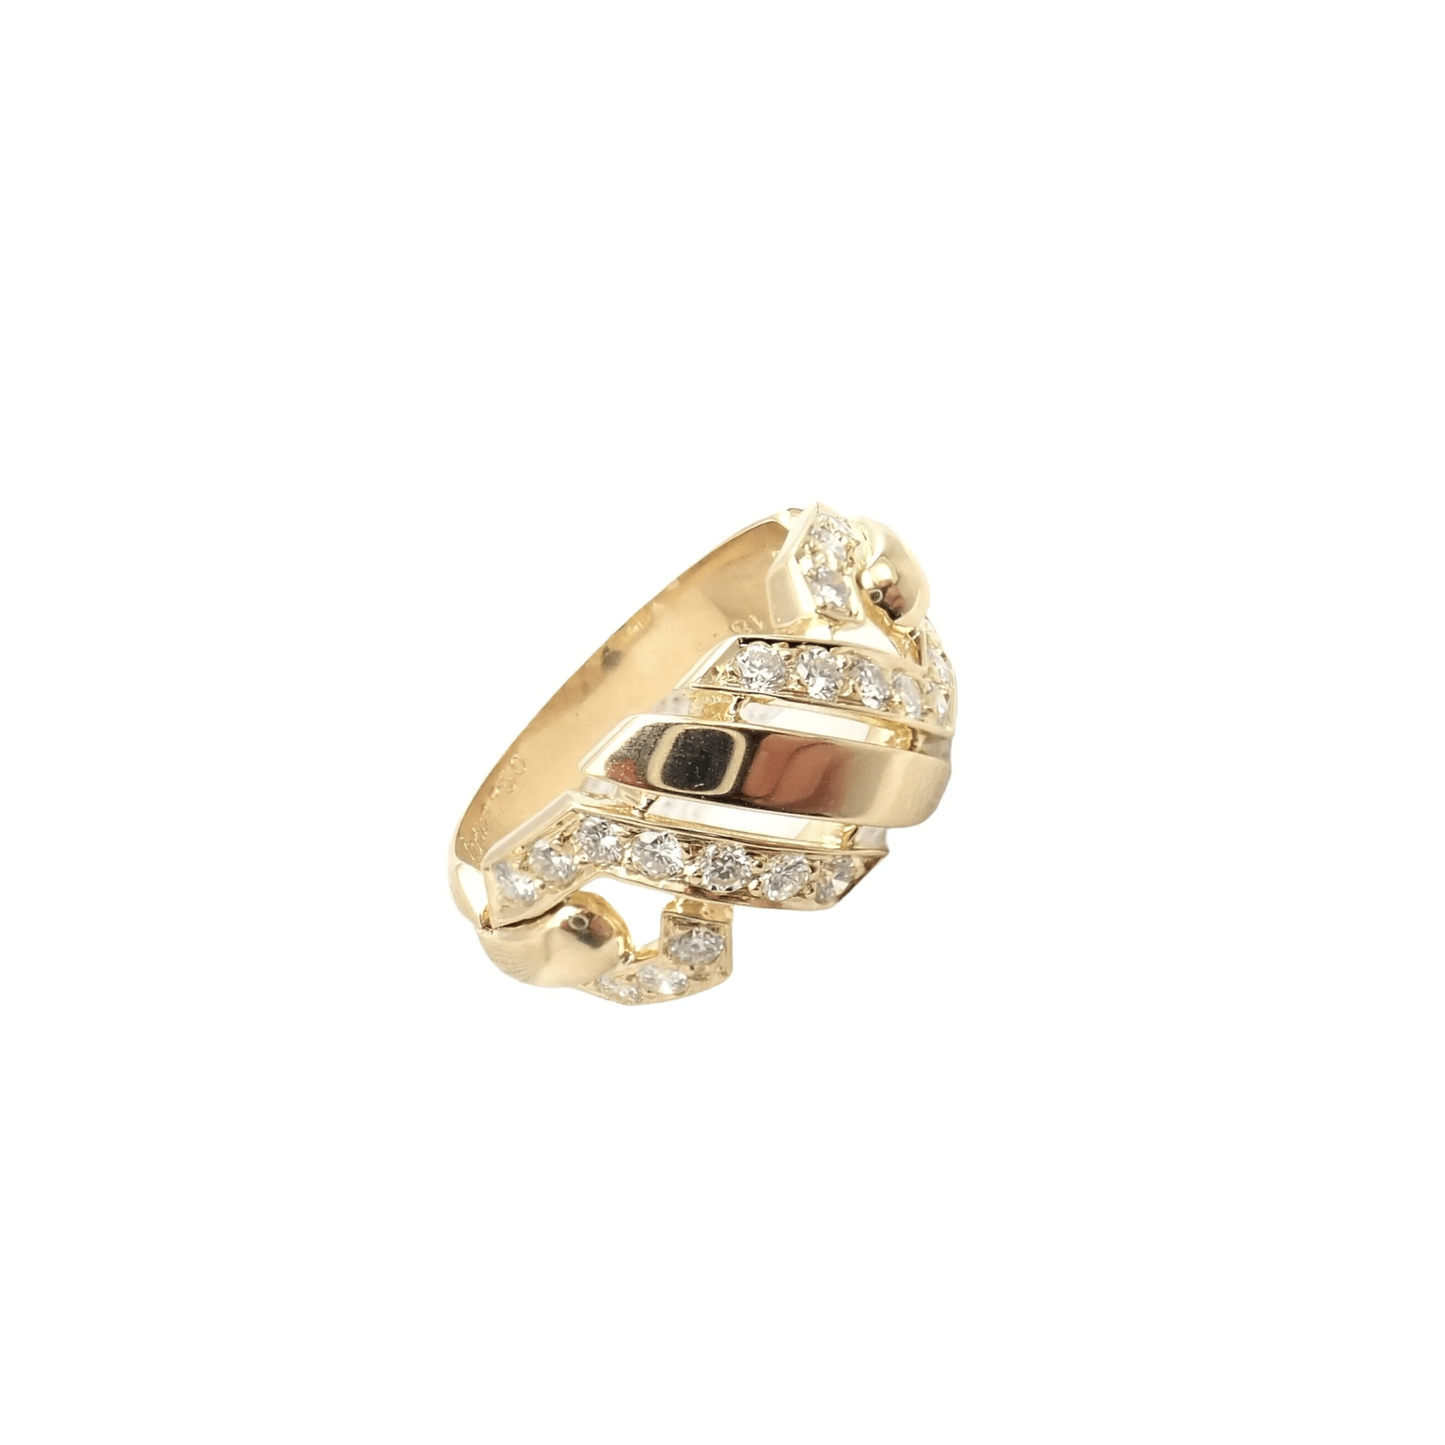 Cartier 1980s 18KT Yellow Gold Diamond Fox Trot Ring front